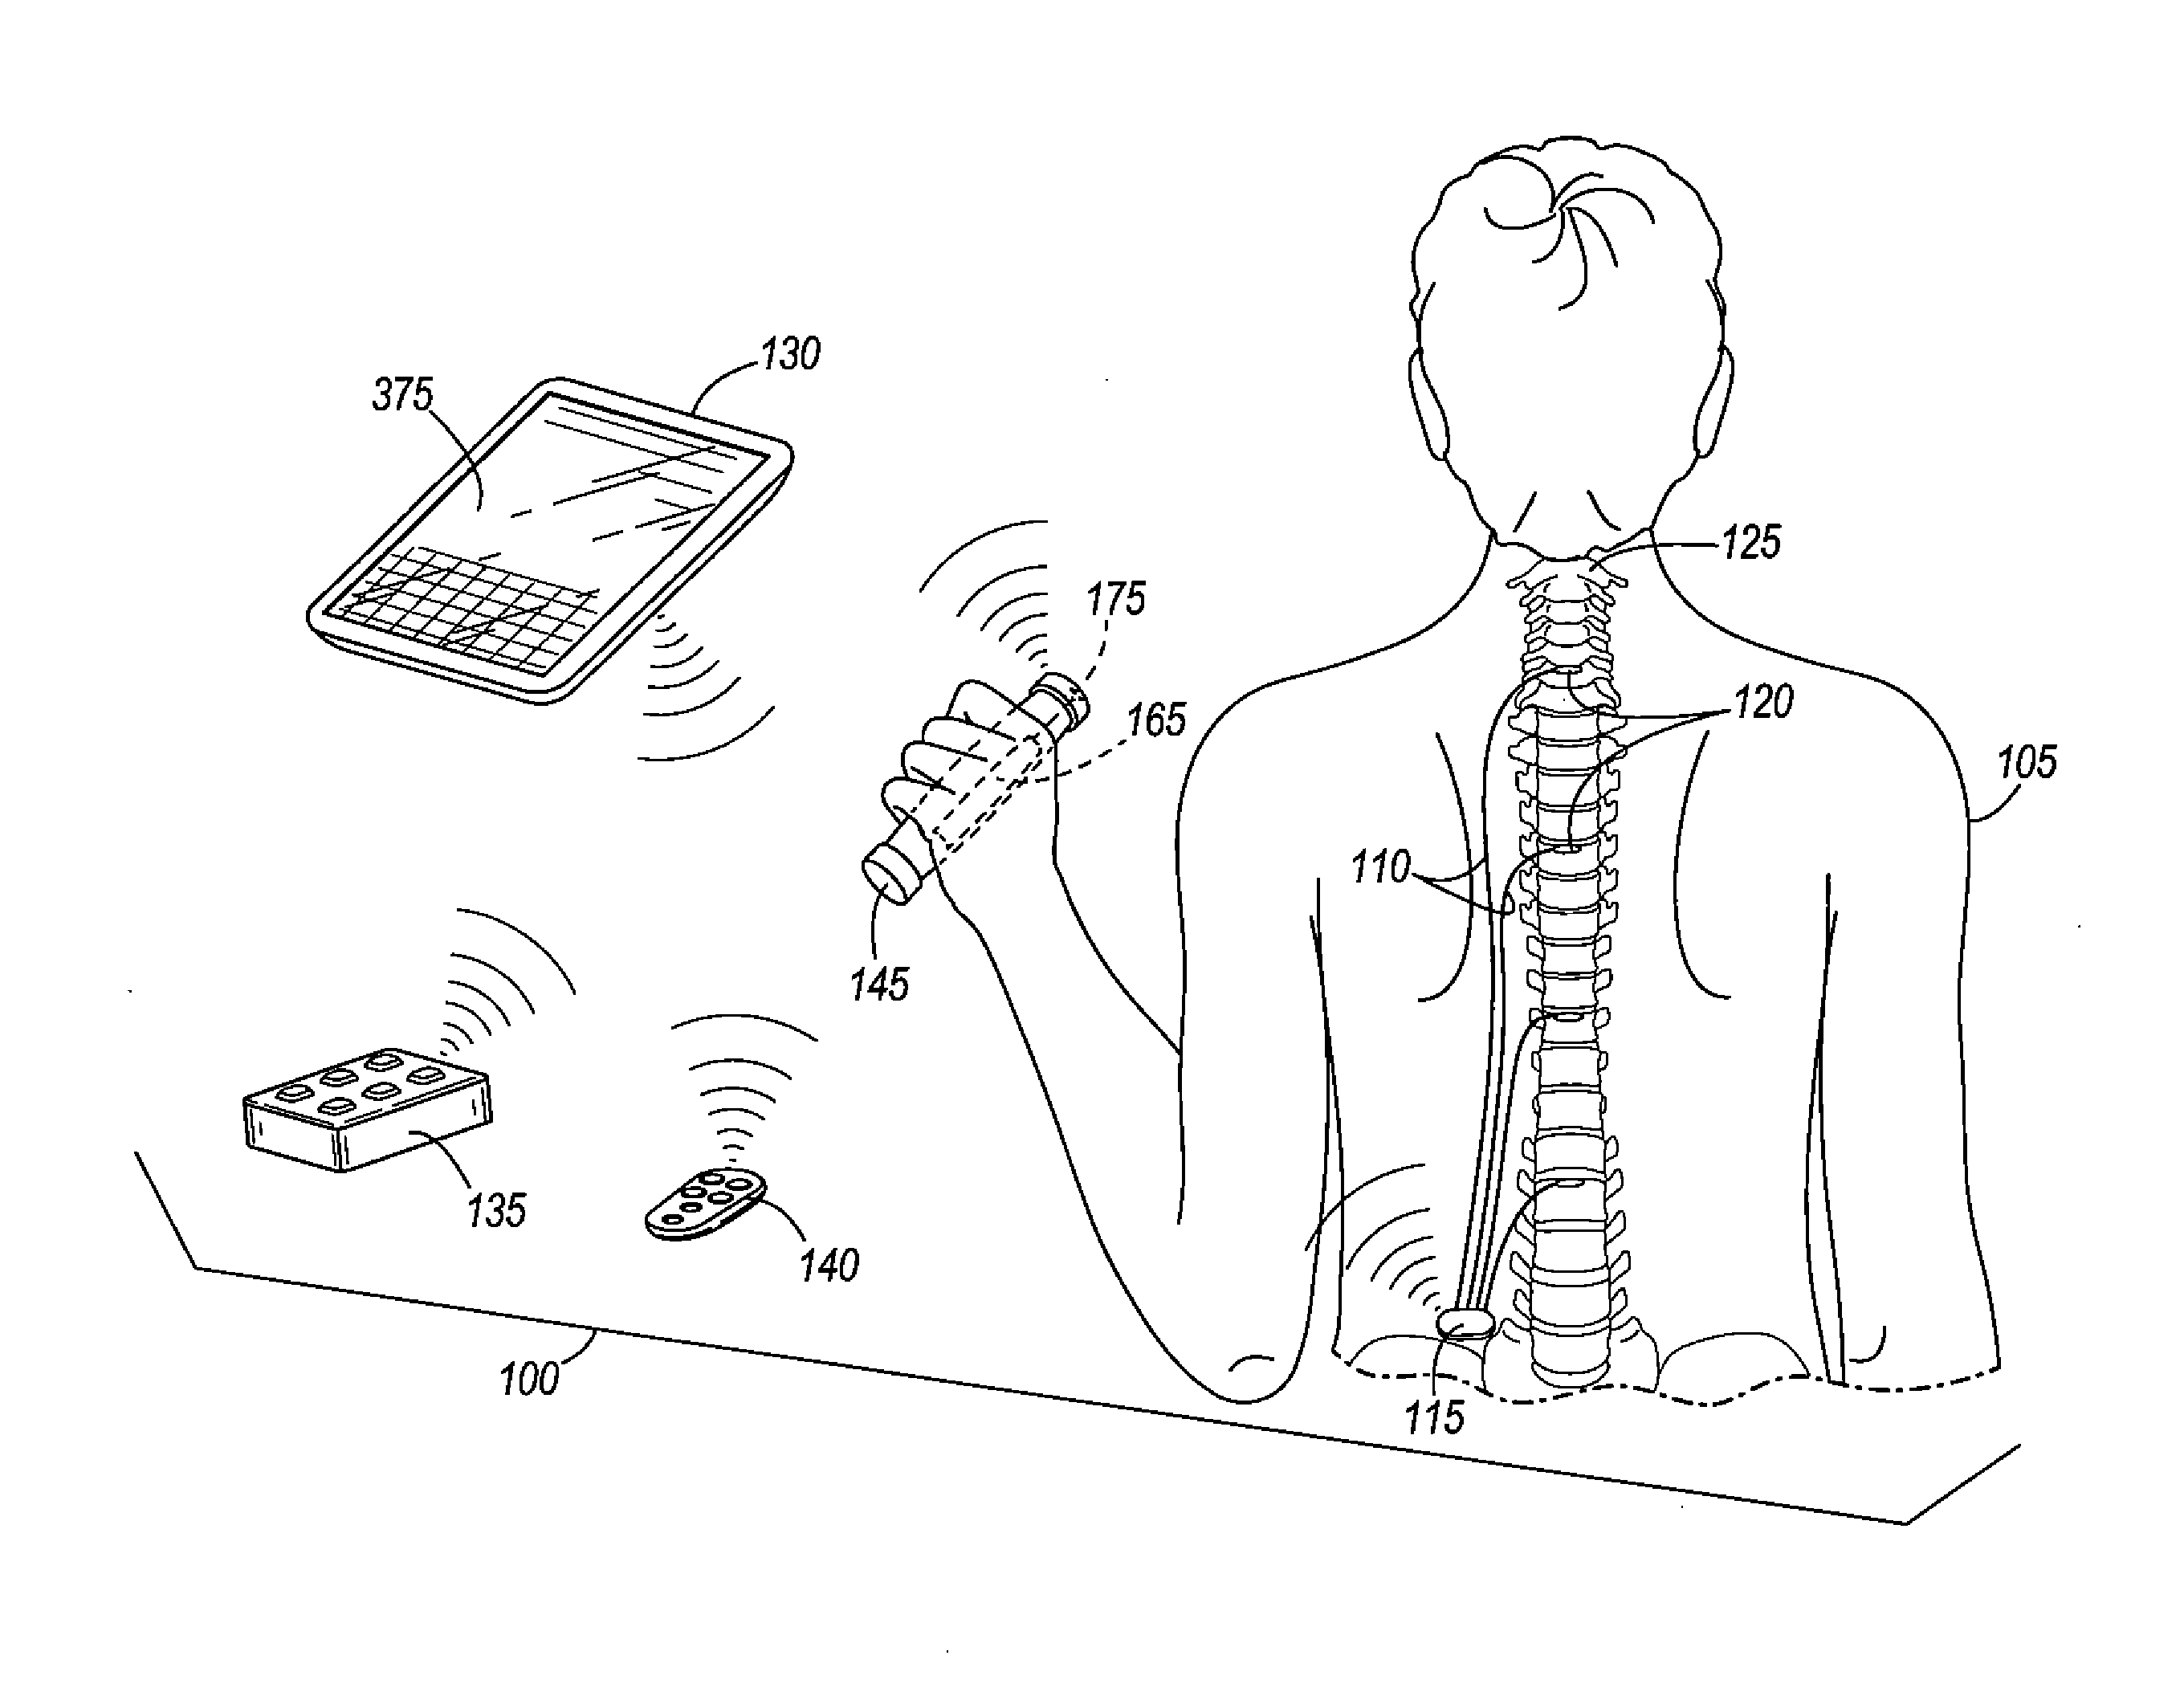 System and method of establishing a protocol for providing electrical stimulation with a stimulation system to treat a patient